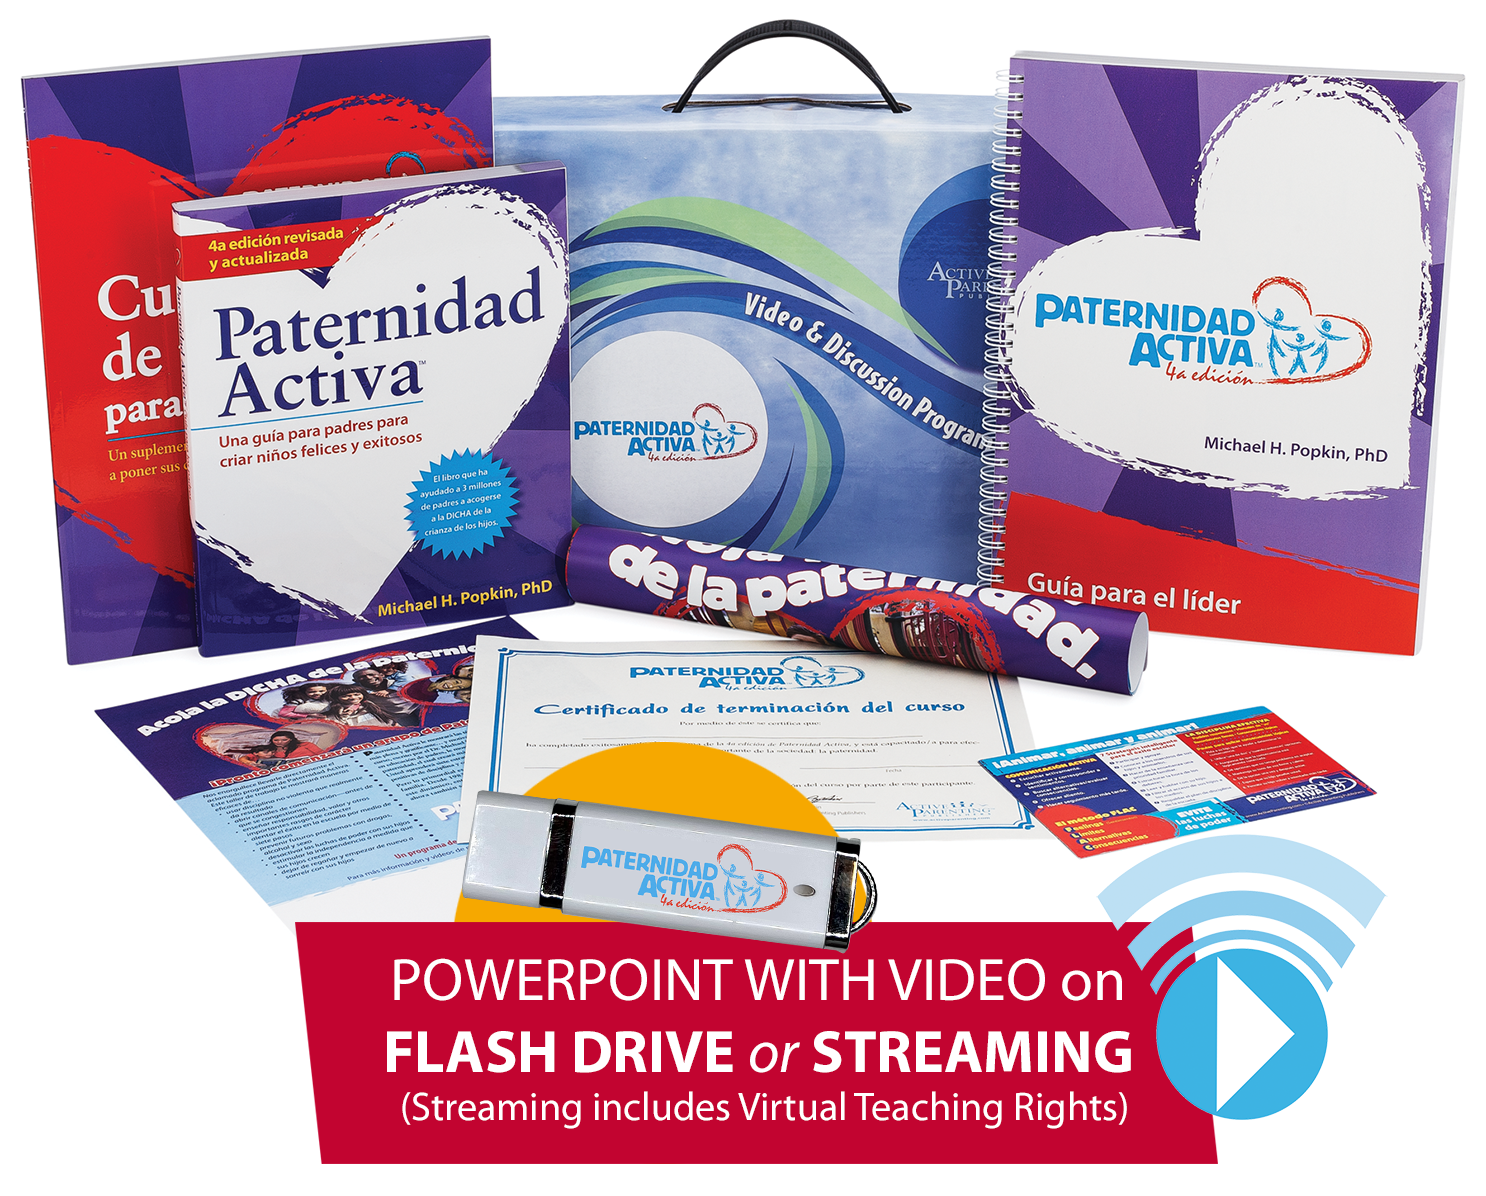 Paternidad Activa 4a Edición (Active Parenting 4th Ed.) Program Kit on Flash Drive or Streaming